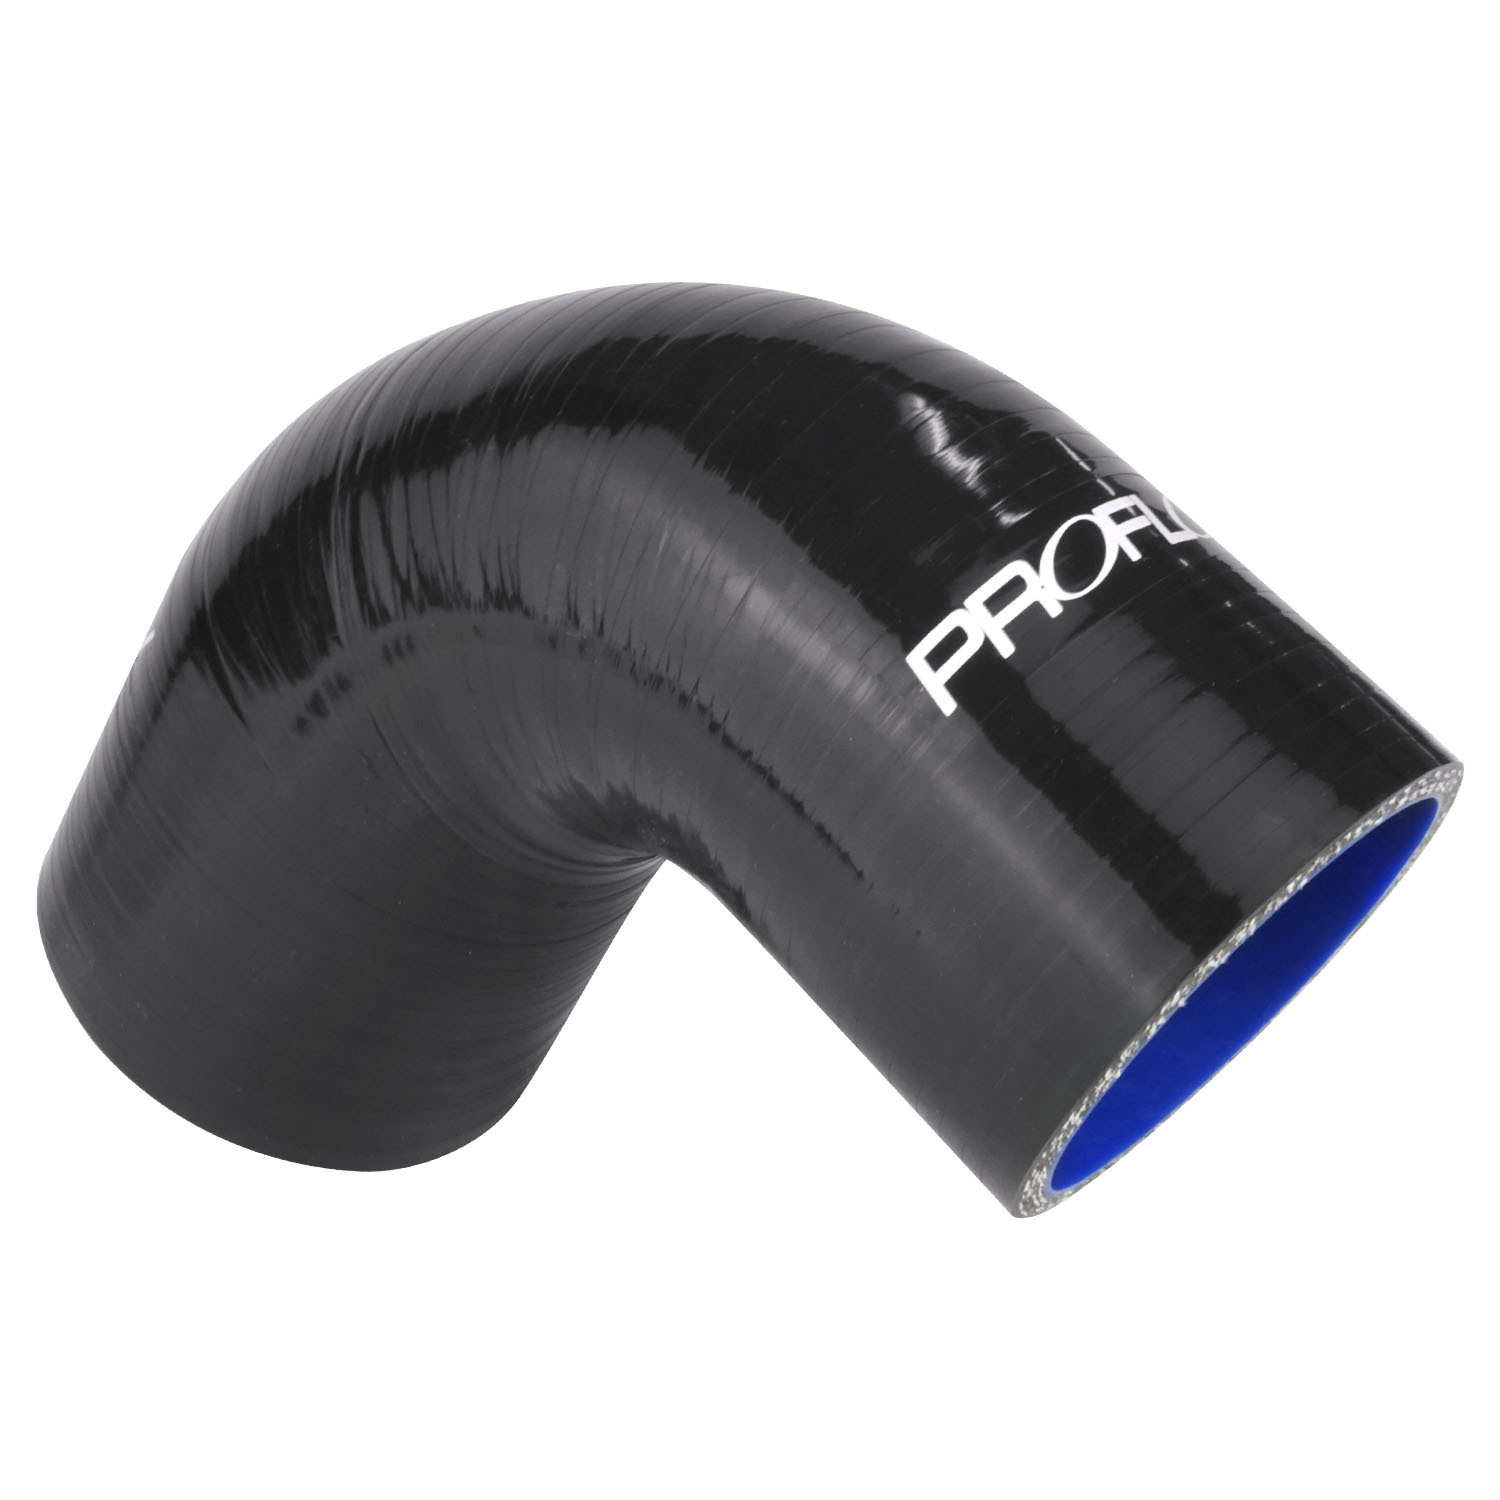 Proflow Hose Tubing Air intake, Silicone, Reducer, 2.25in. - 2.50in. 90 Degree Elbow, Black